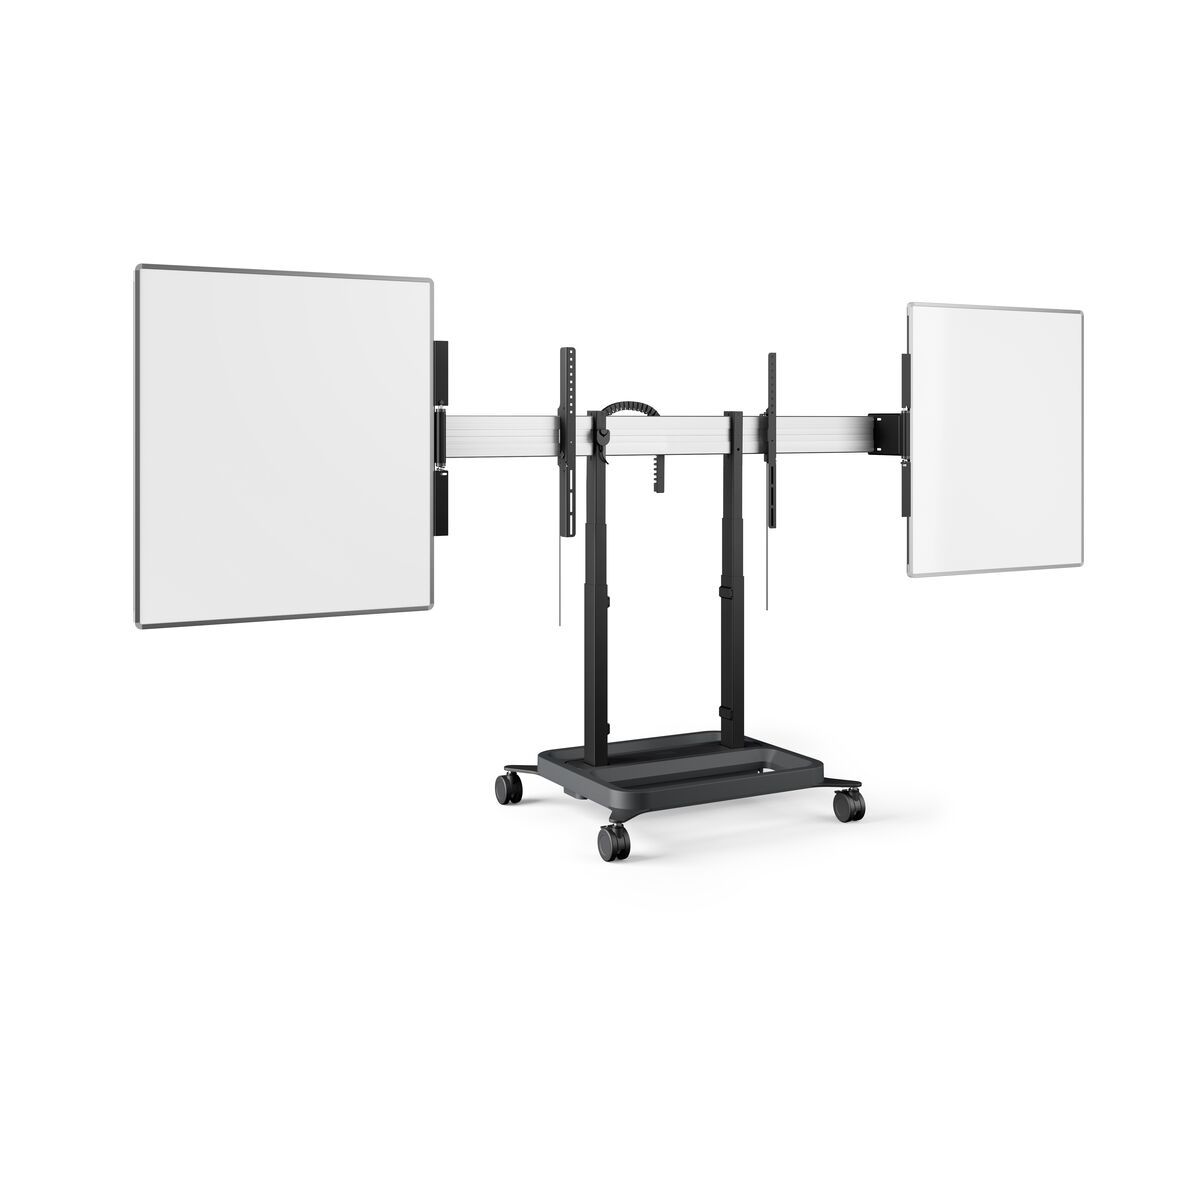 VOGELS RISE A226 - Whiteboard set 65 inch for motorised RISE stands and trolleys